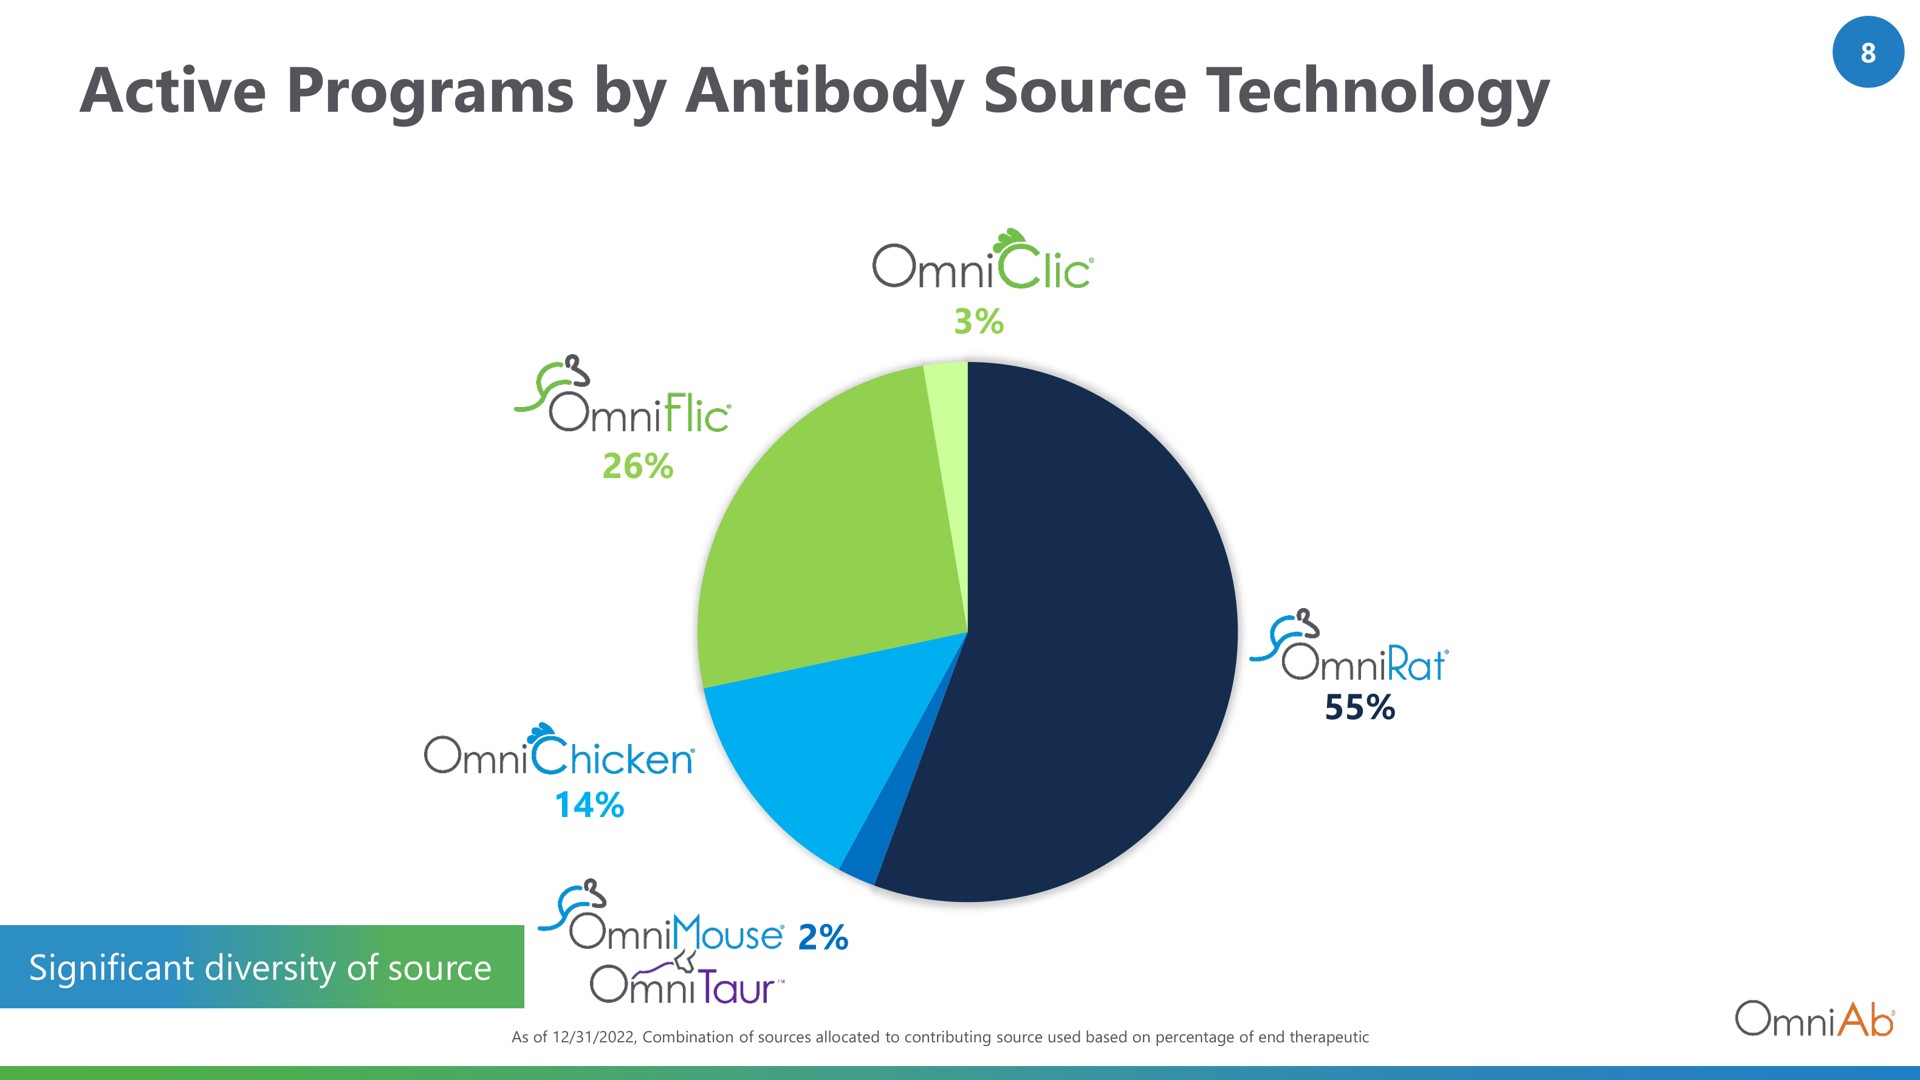 active programs by antibody source technology | OmniAb